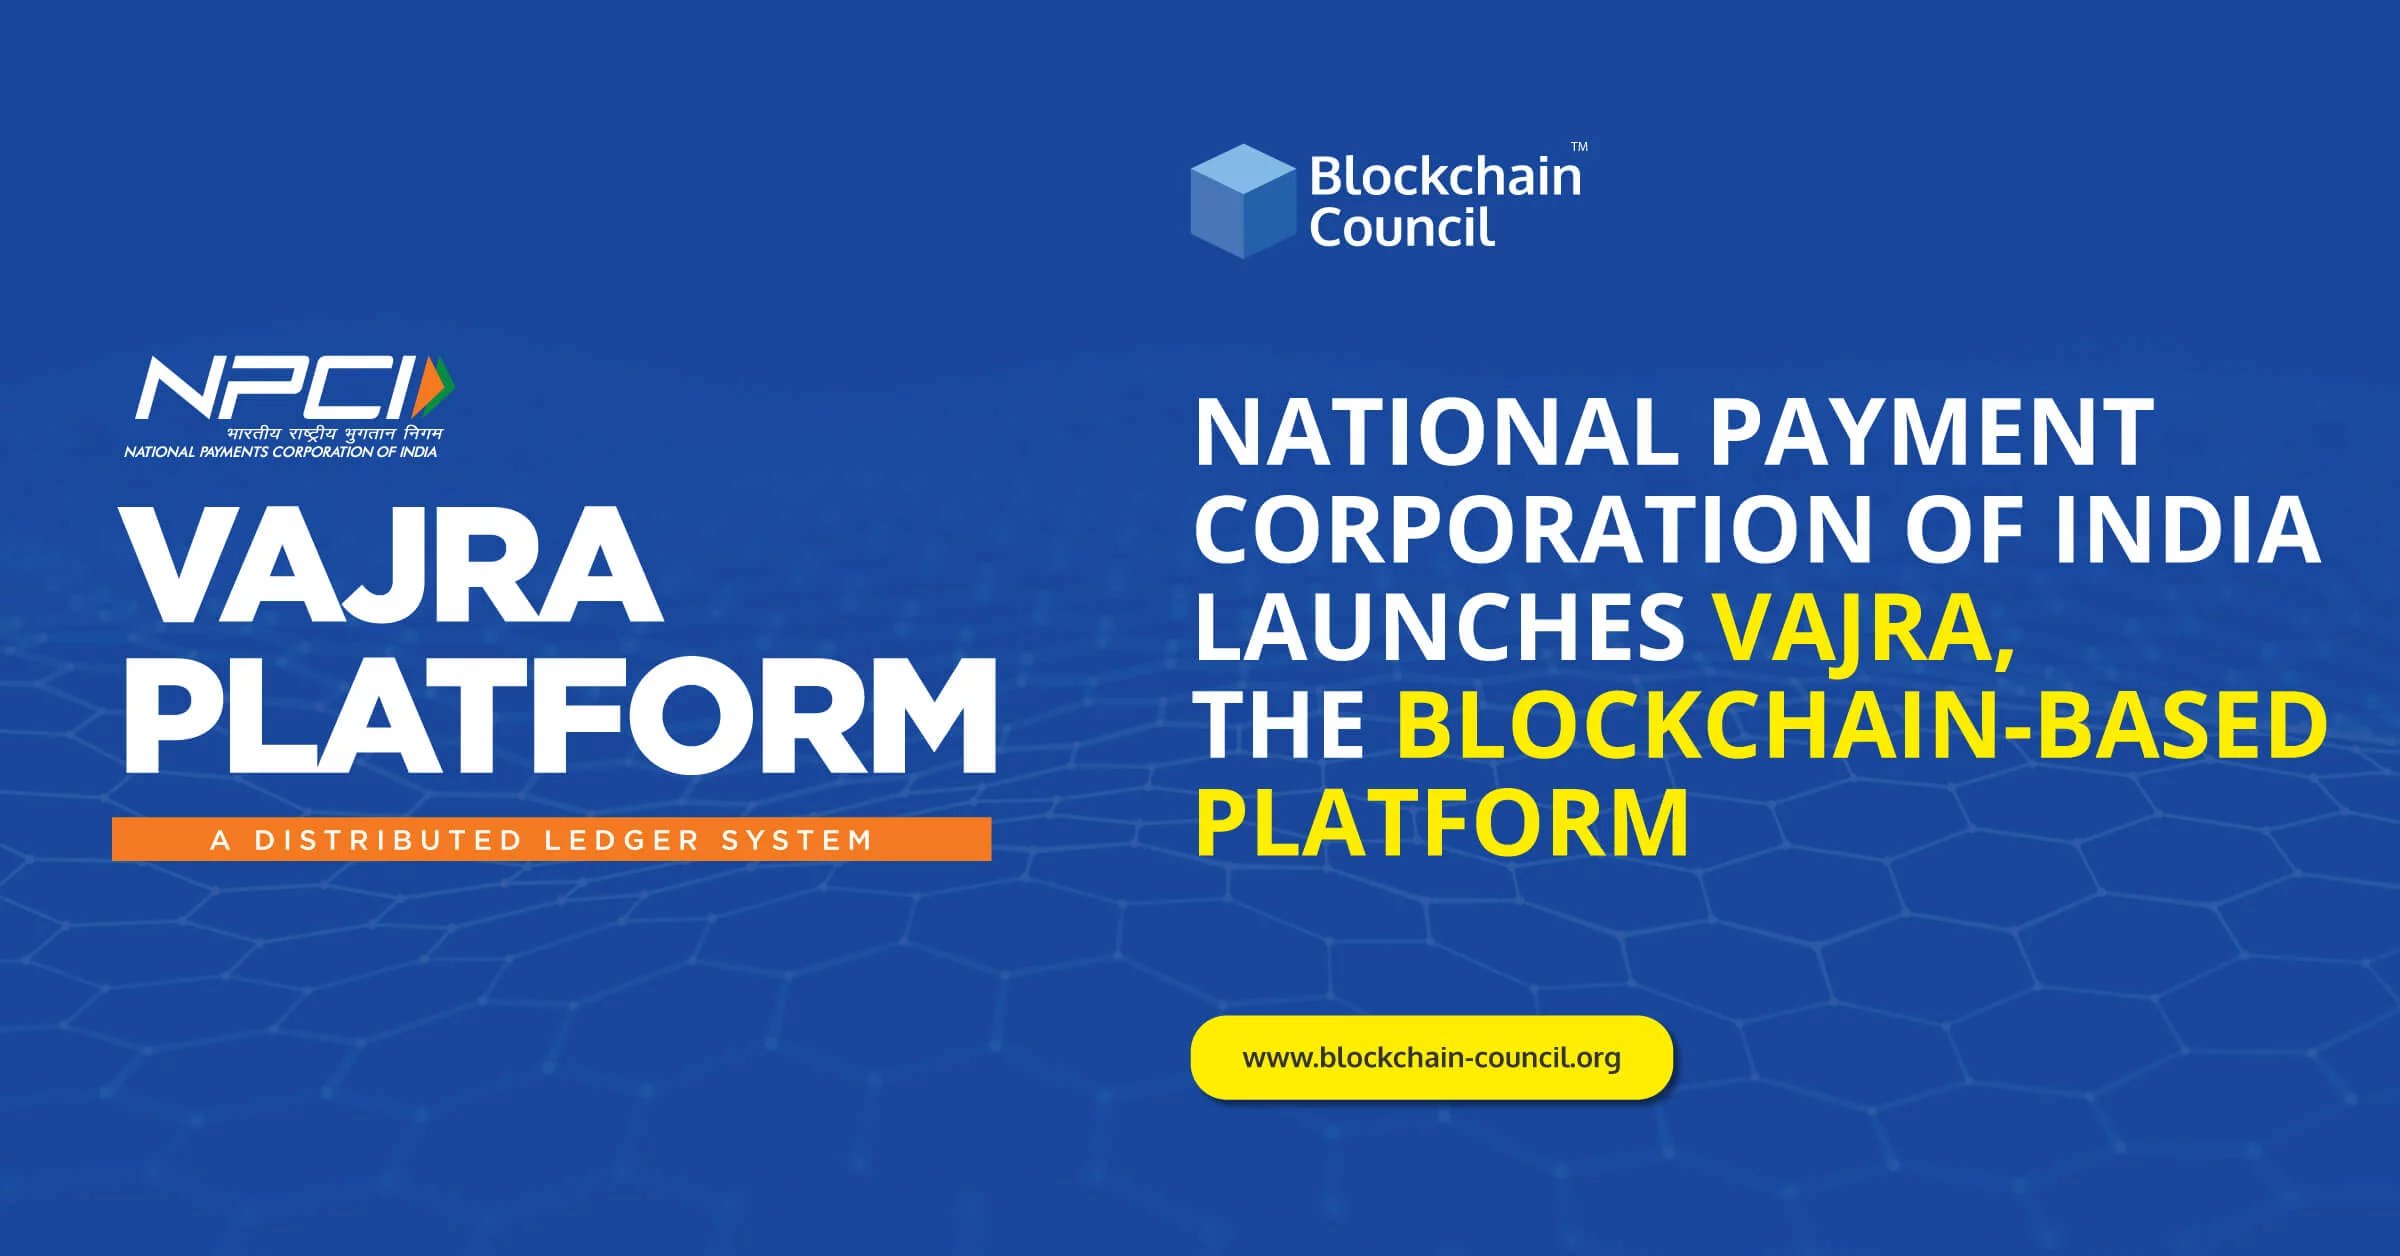 National Payment Corporation of India Launches Vajra, the Blockchain-Based Platform